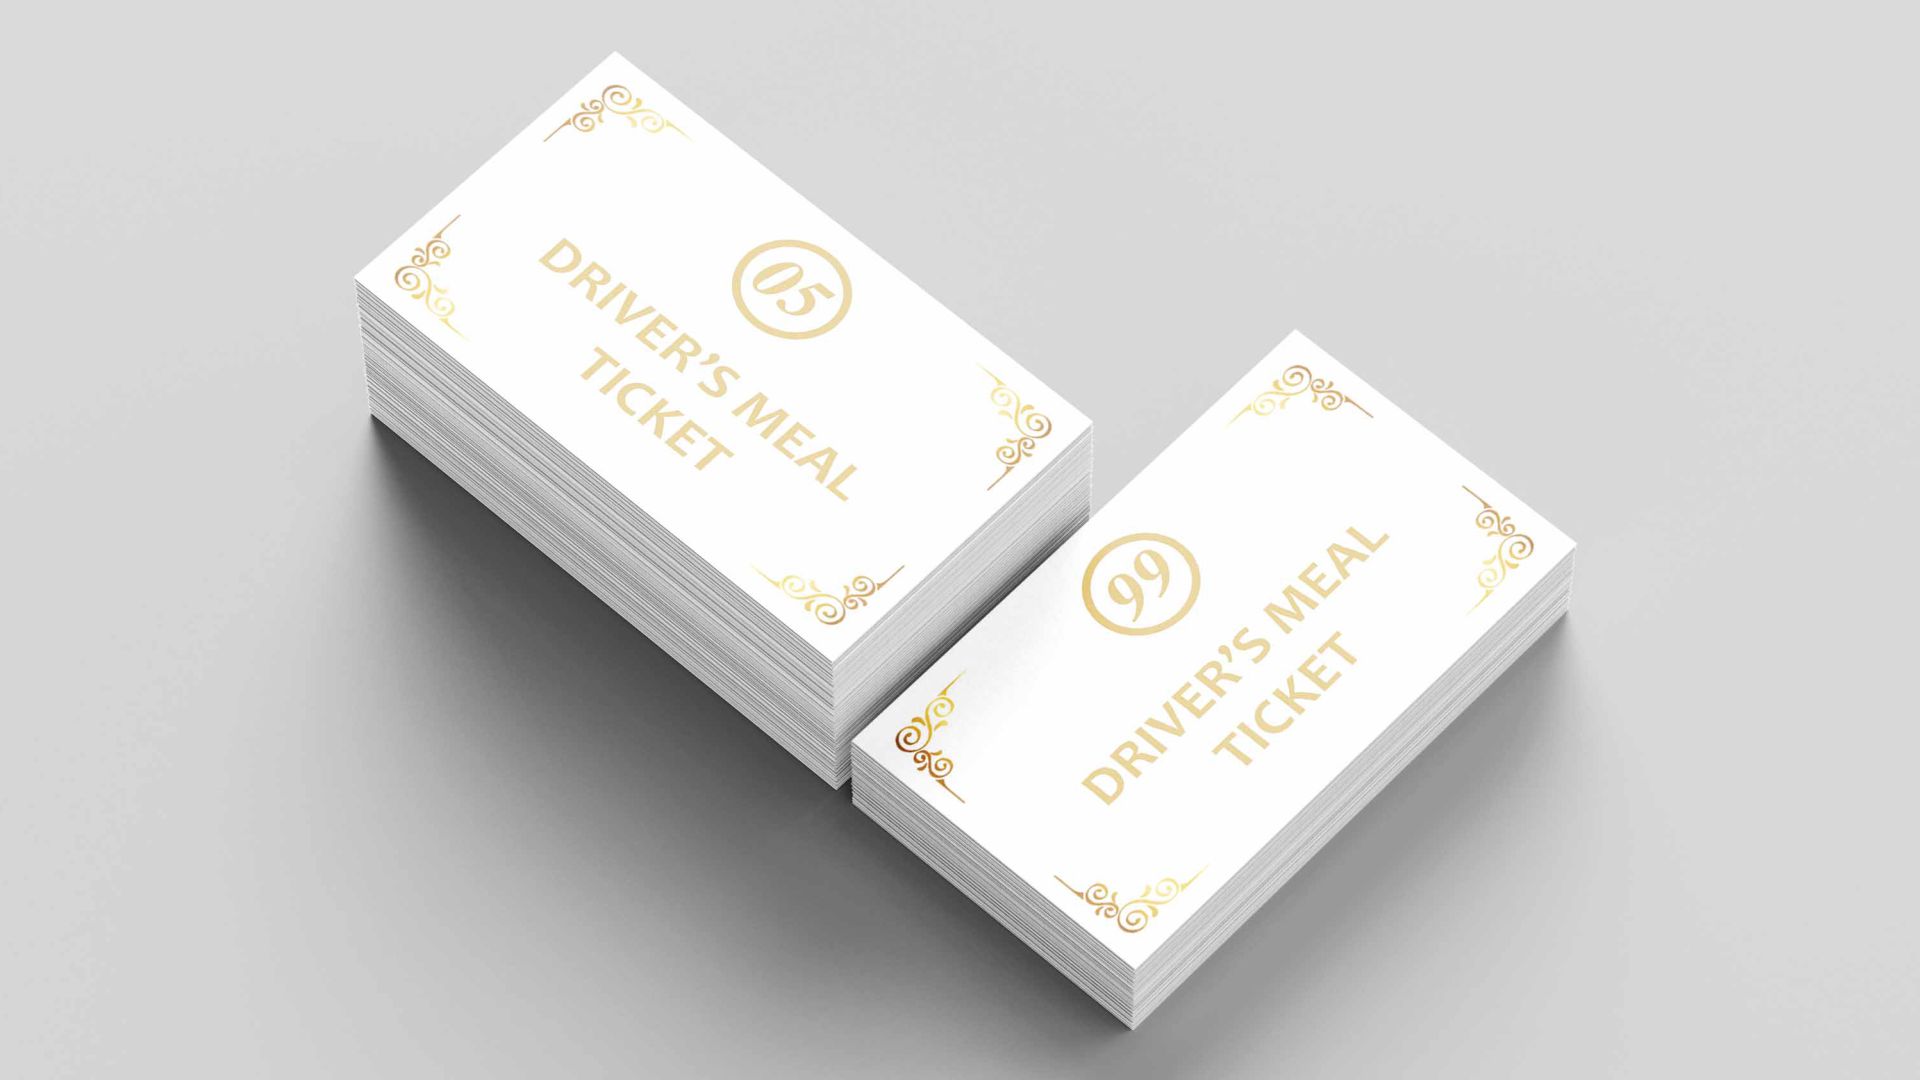 Drivers Meal Ticket Card Design and Printing in Lagos Nigeria